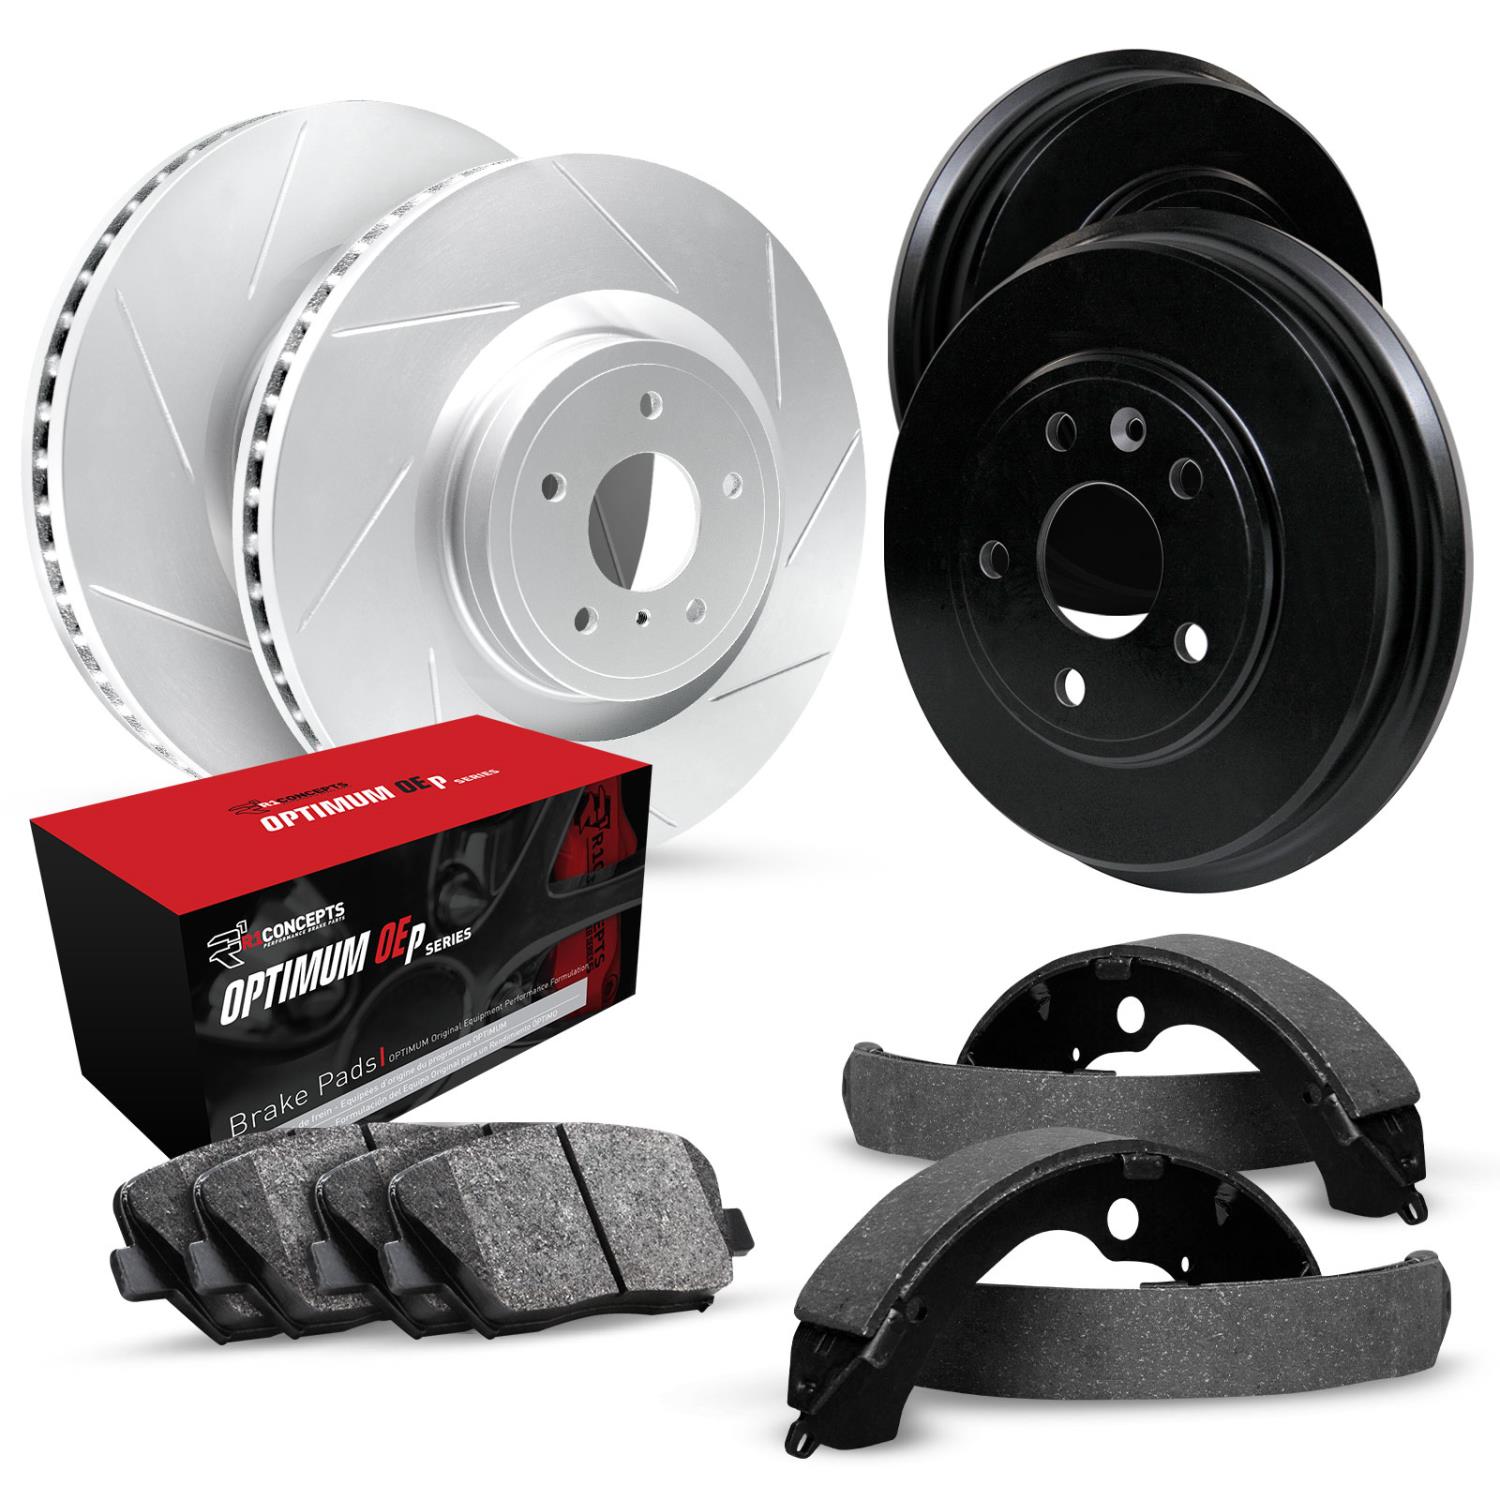 GEO-Carbon Slotted Brake Rotor & Drum Set w/Optimum OE Pads & Shoes, 2013-2021 Fits Multiple Makes/Models